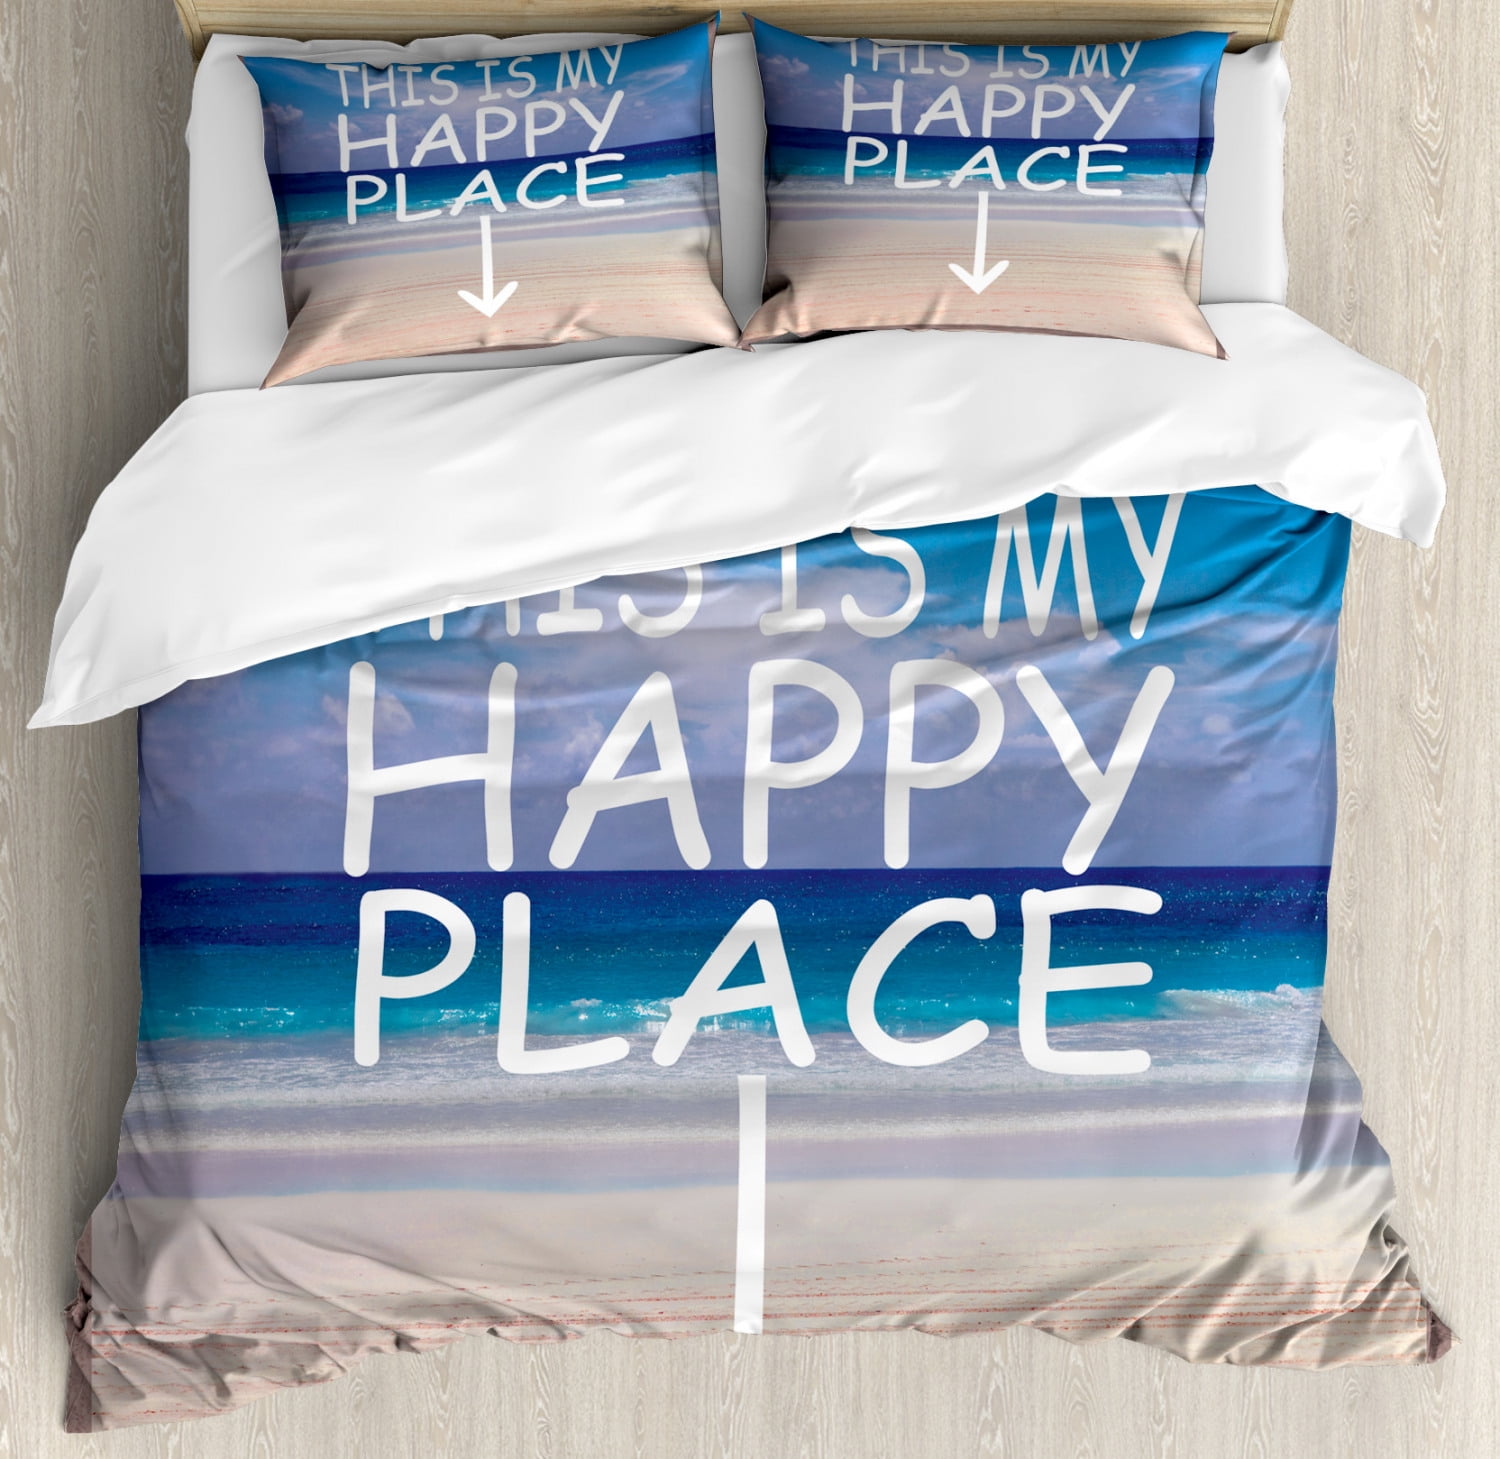 E Duvet Cover Set This Is My Happy, What Do You Put In A Duvet Cover The Summer